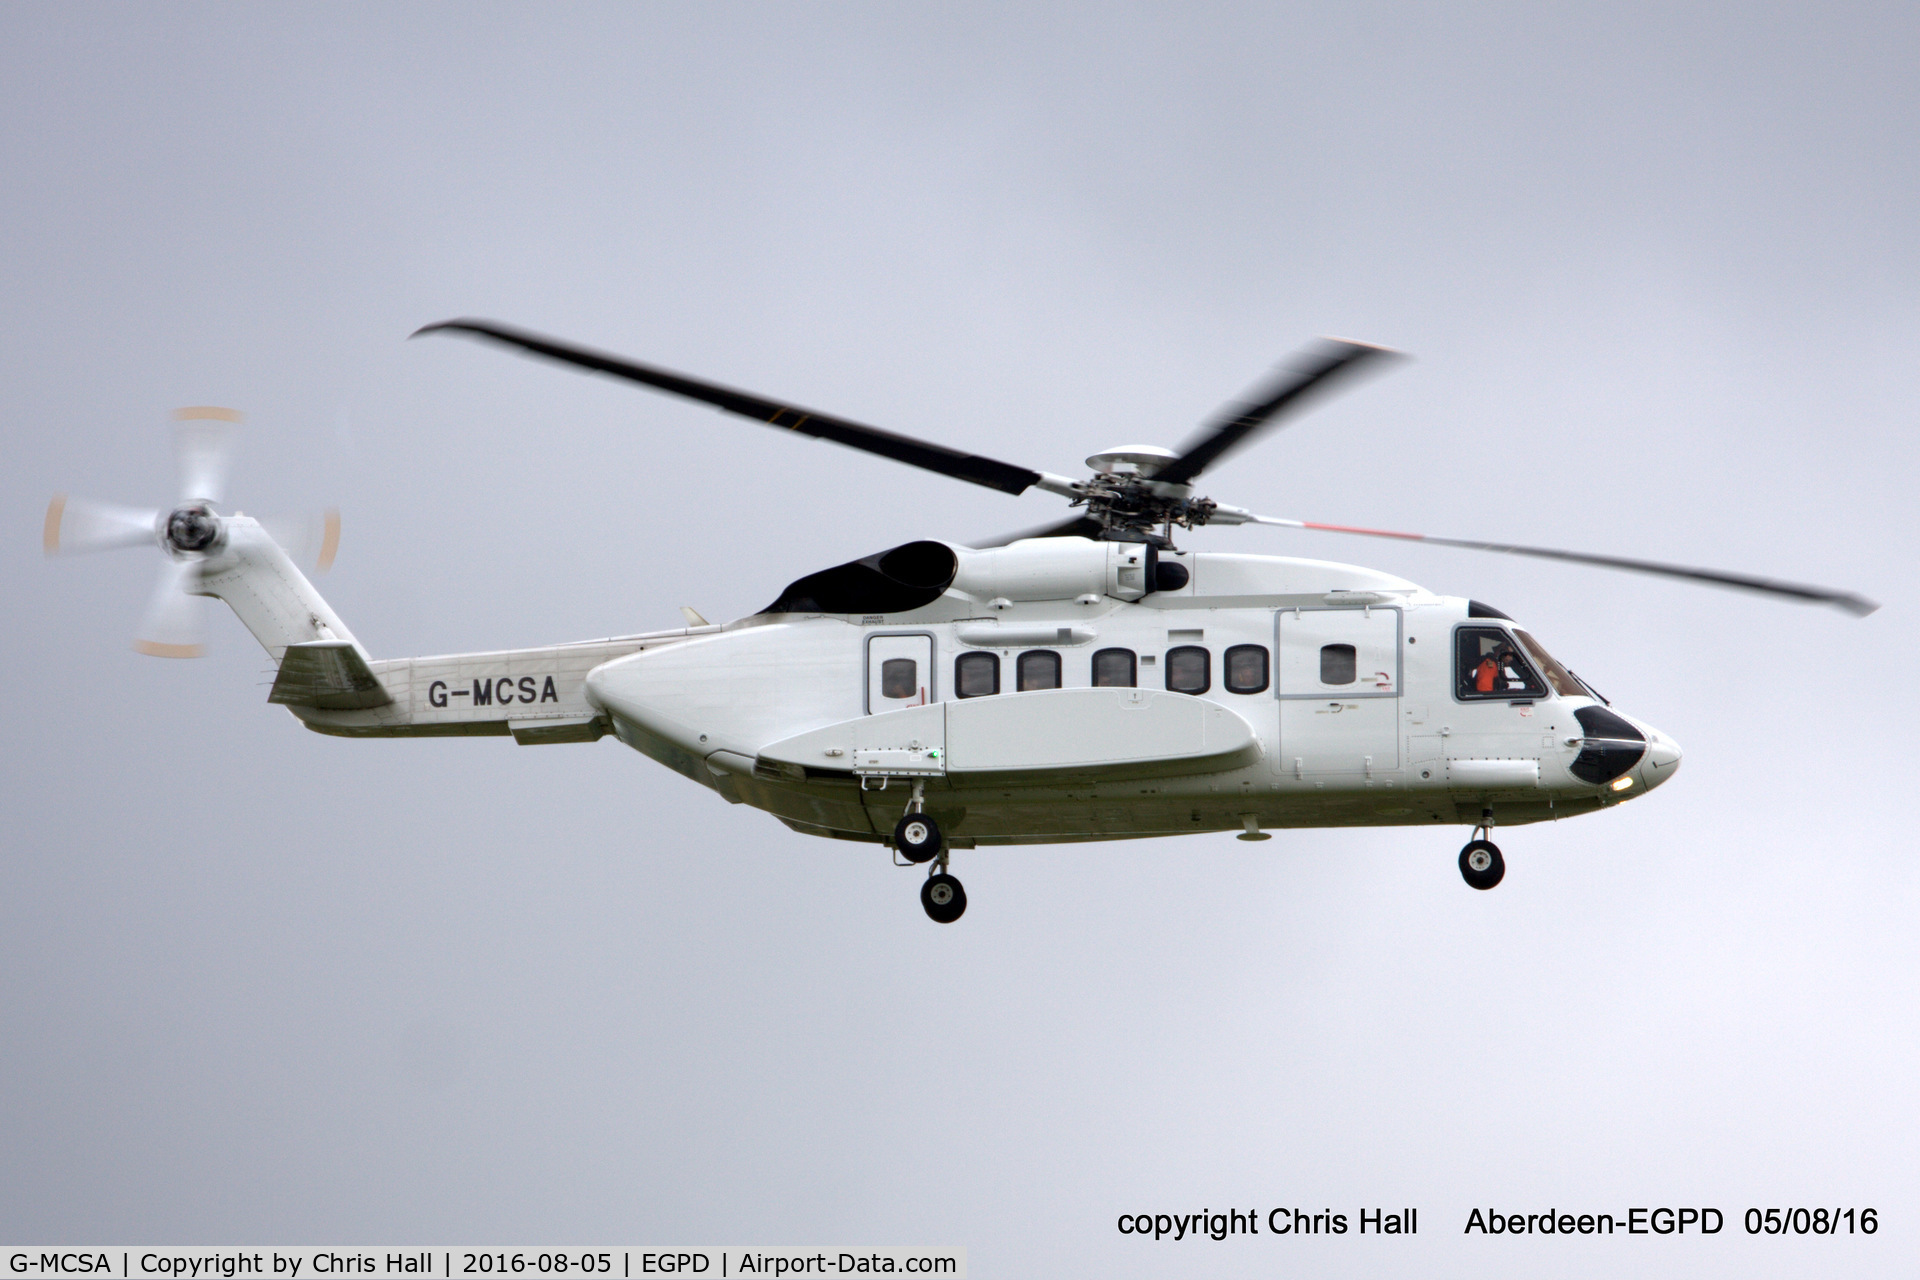 G-MCSA, 2015 Sikorsky S-92A C/N 920273, Babcock MCS Offshore